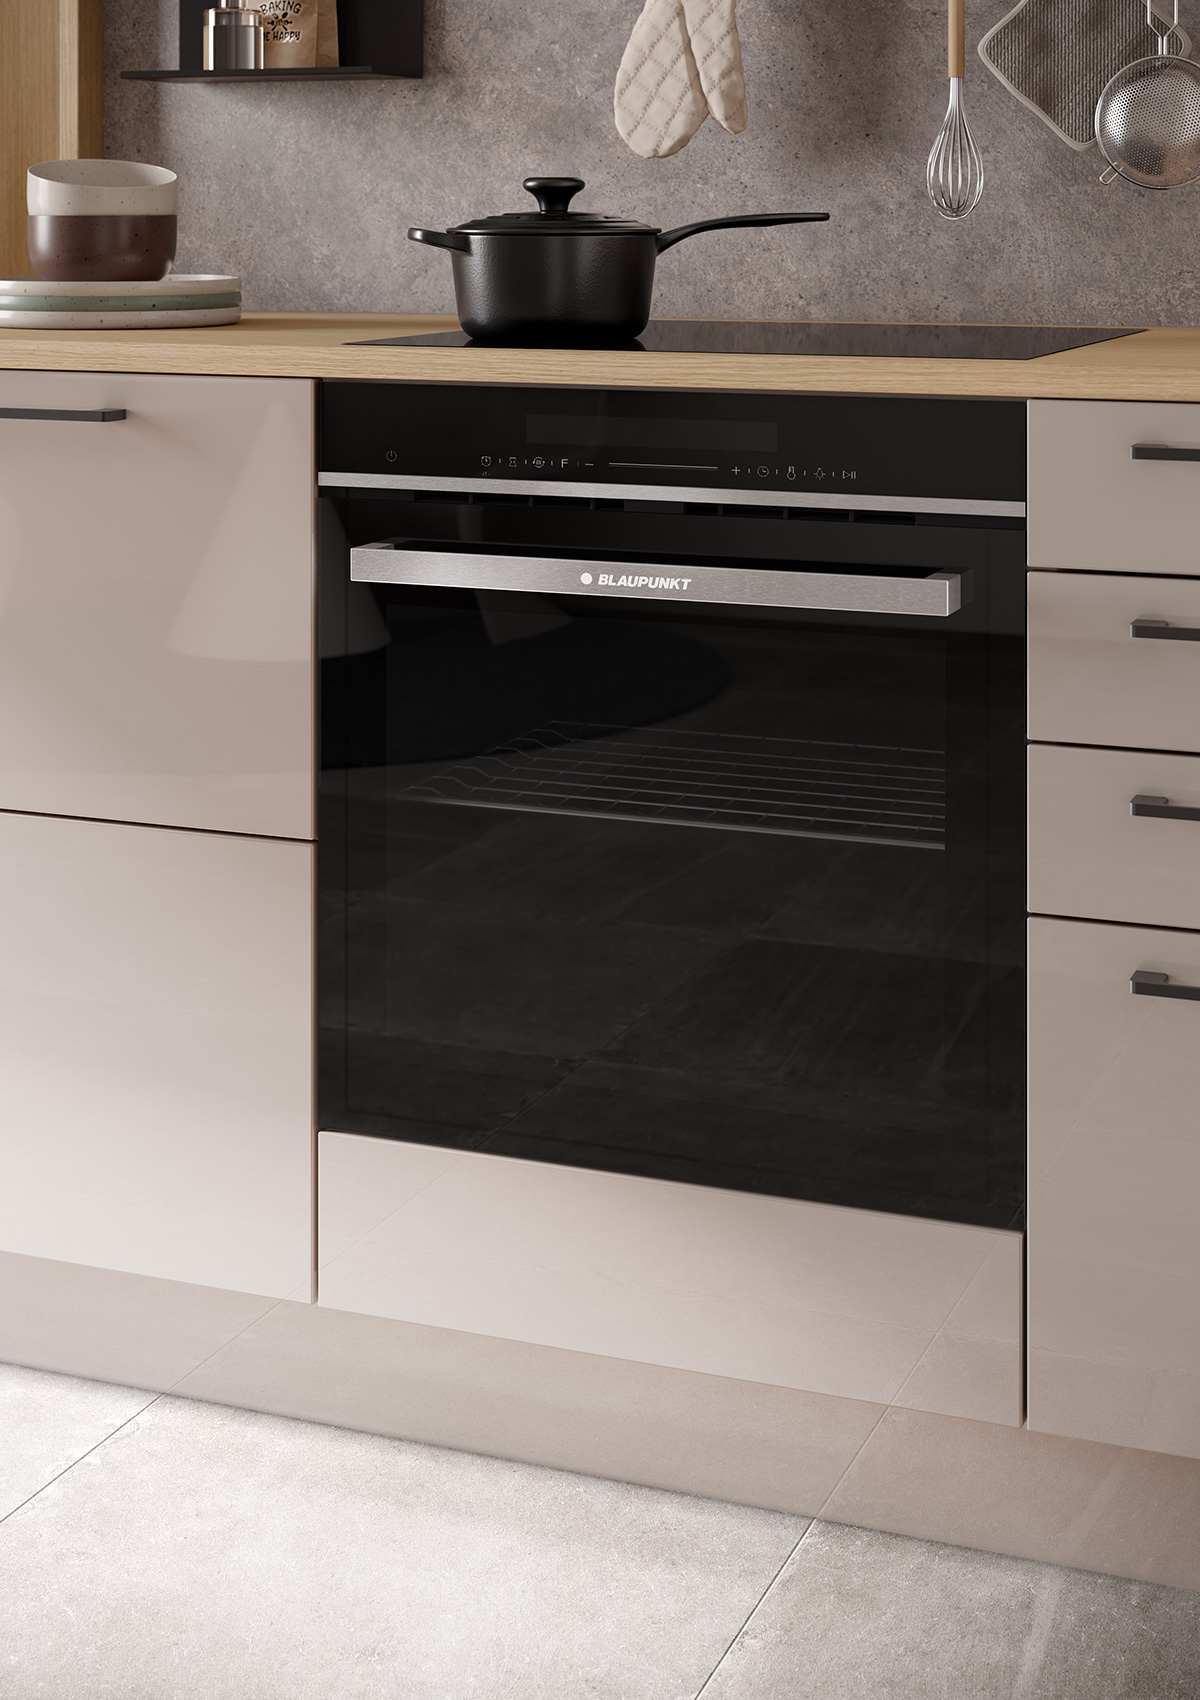 Pictures of a BLAUPUNKT oven integrated into the kitchen unit